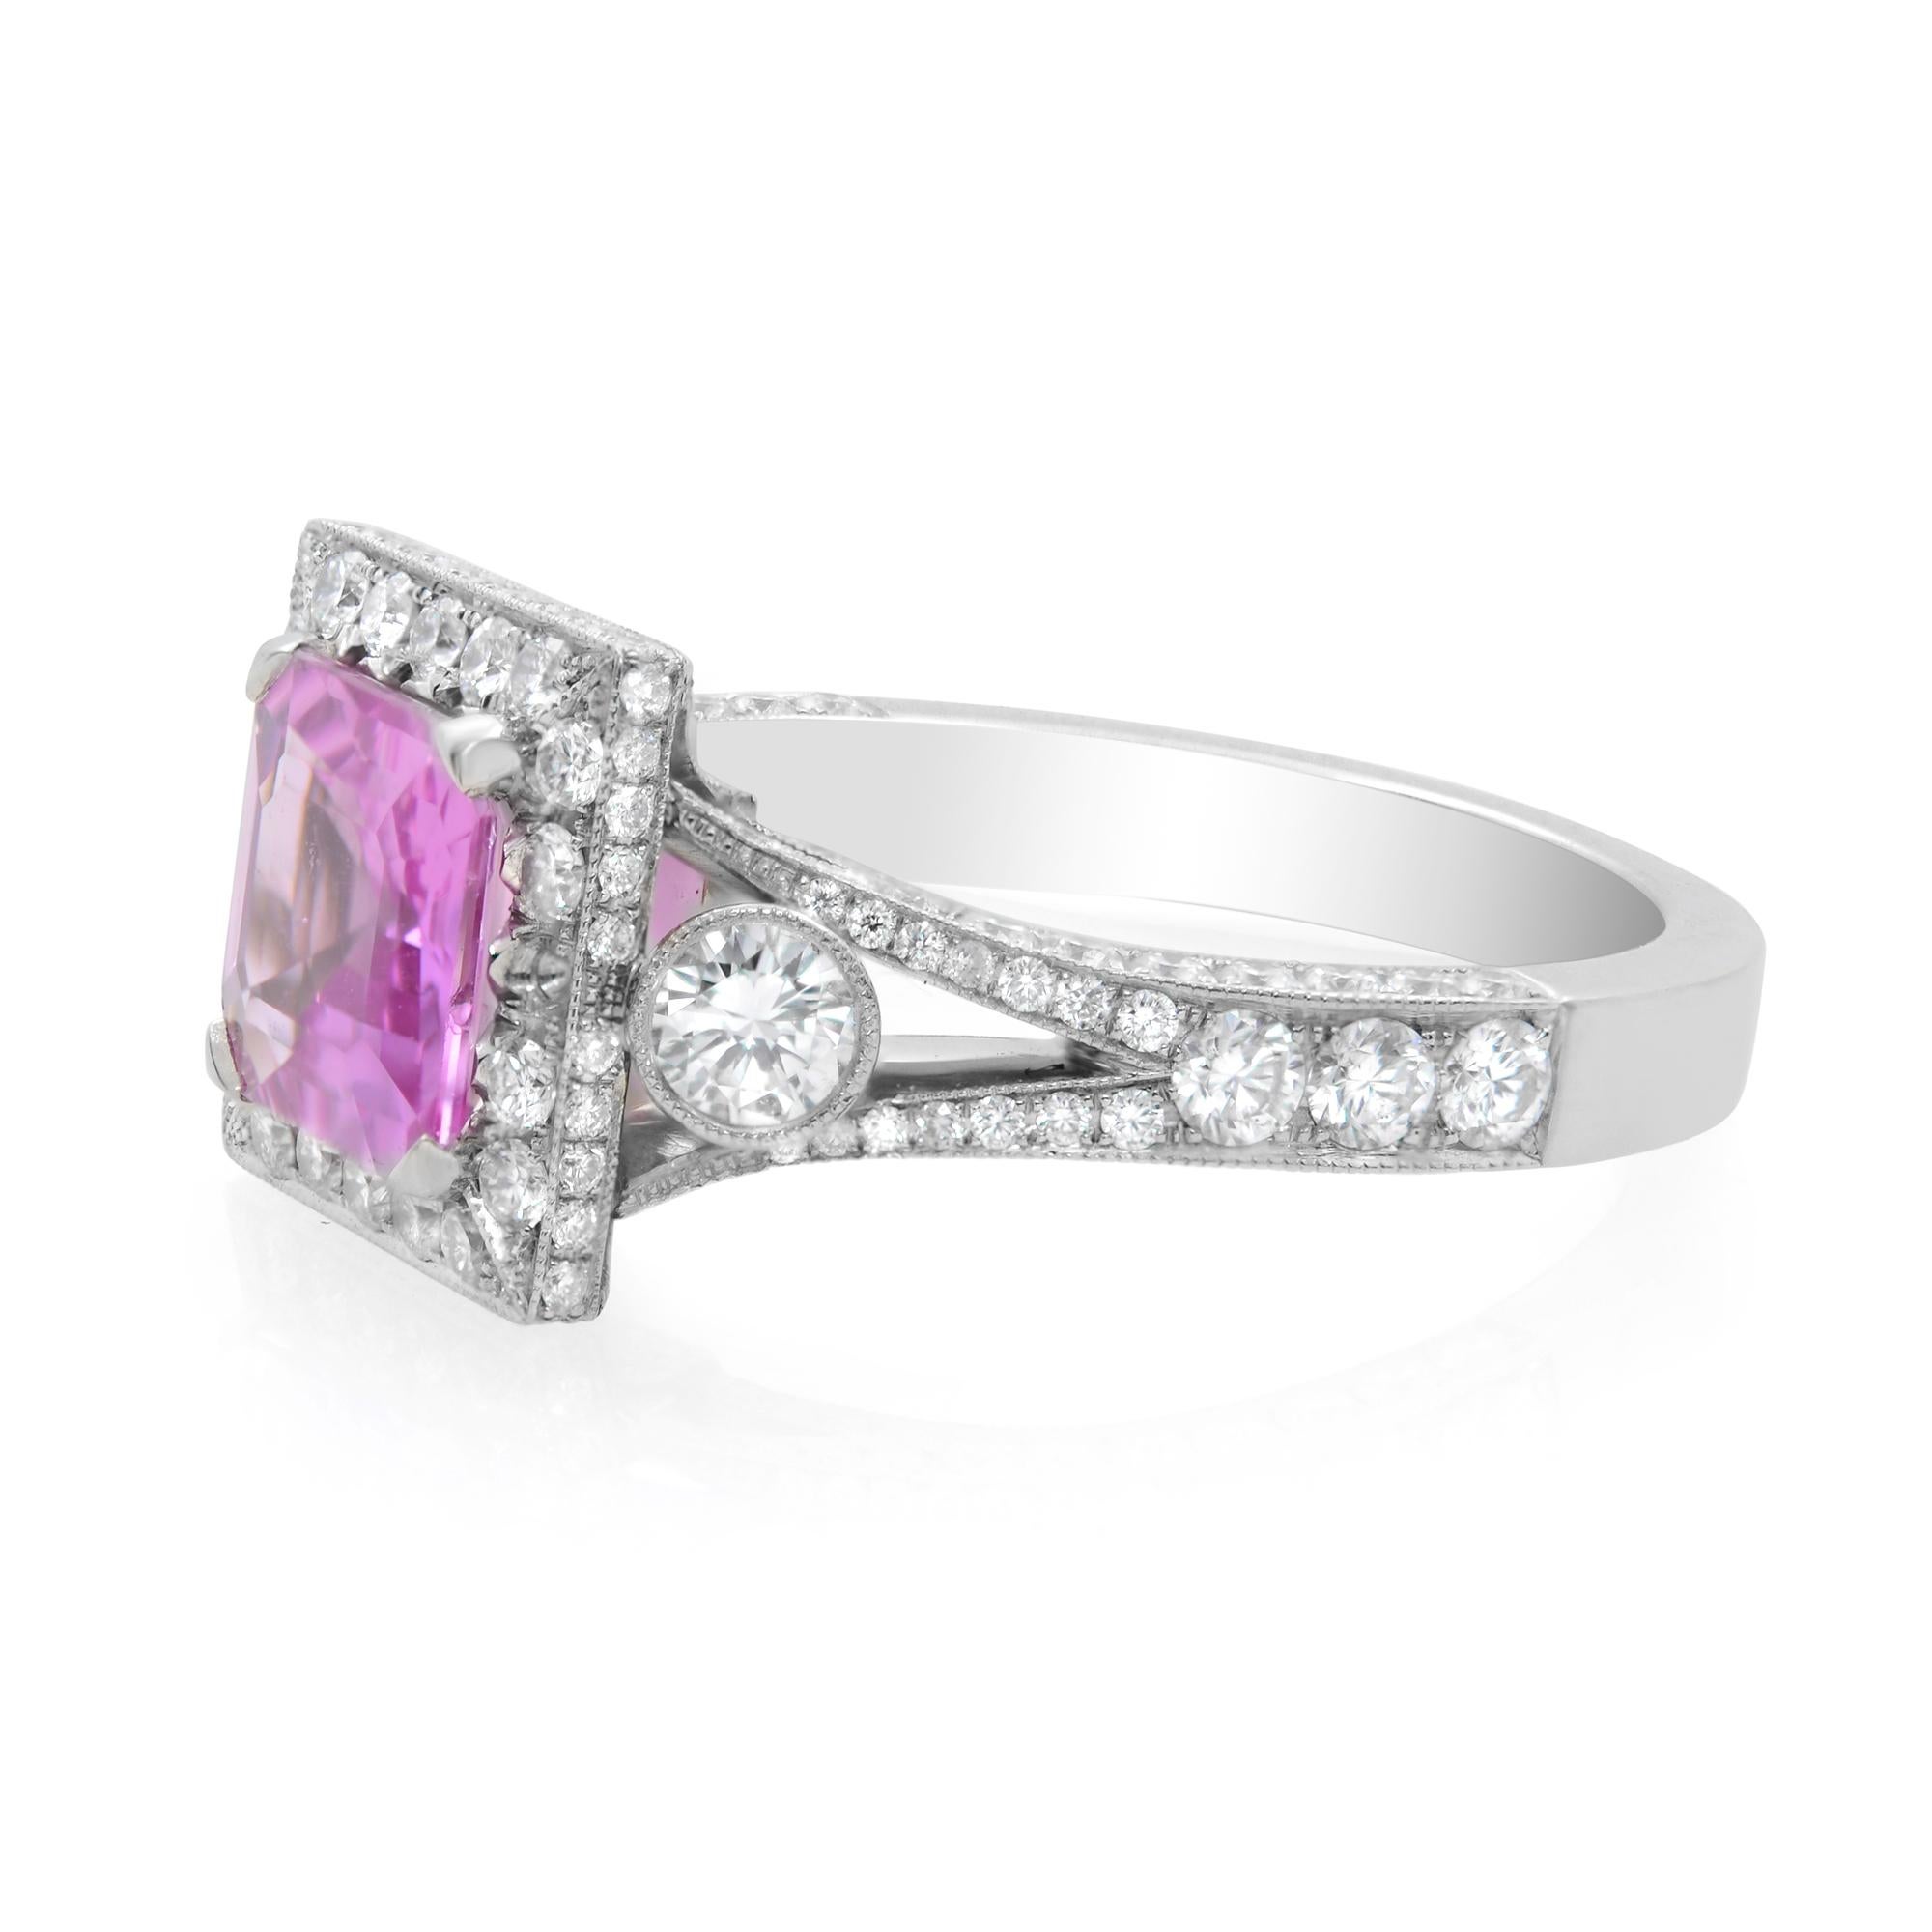 An Asscher cut pink Sapphire 1.53cts is held in a prong setting, surrounded by a dazzling diamond halo. The delightful pink hue beautifully blends with the brilliance of the diamonds. This platinum pink sapphire halo engagement ring is also adorned